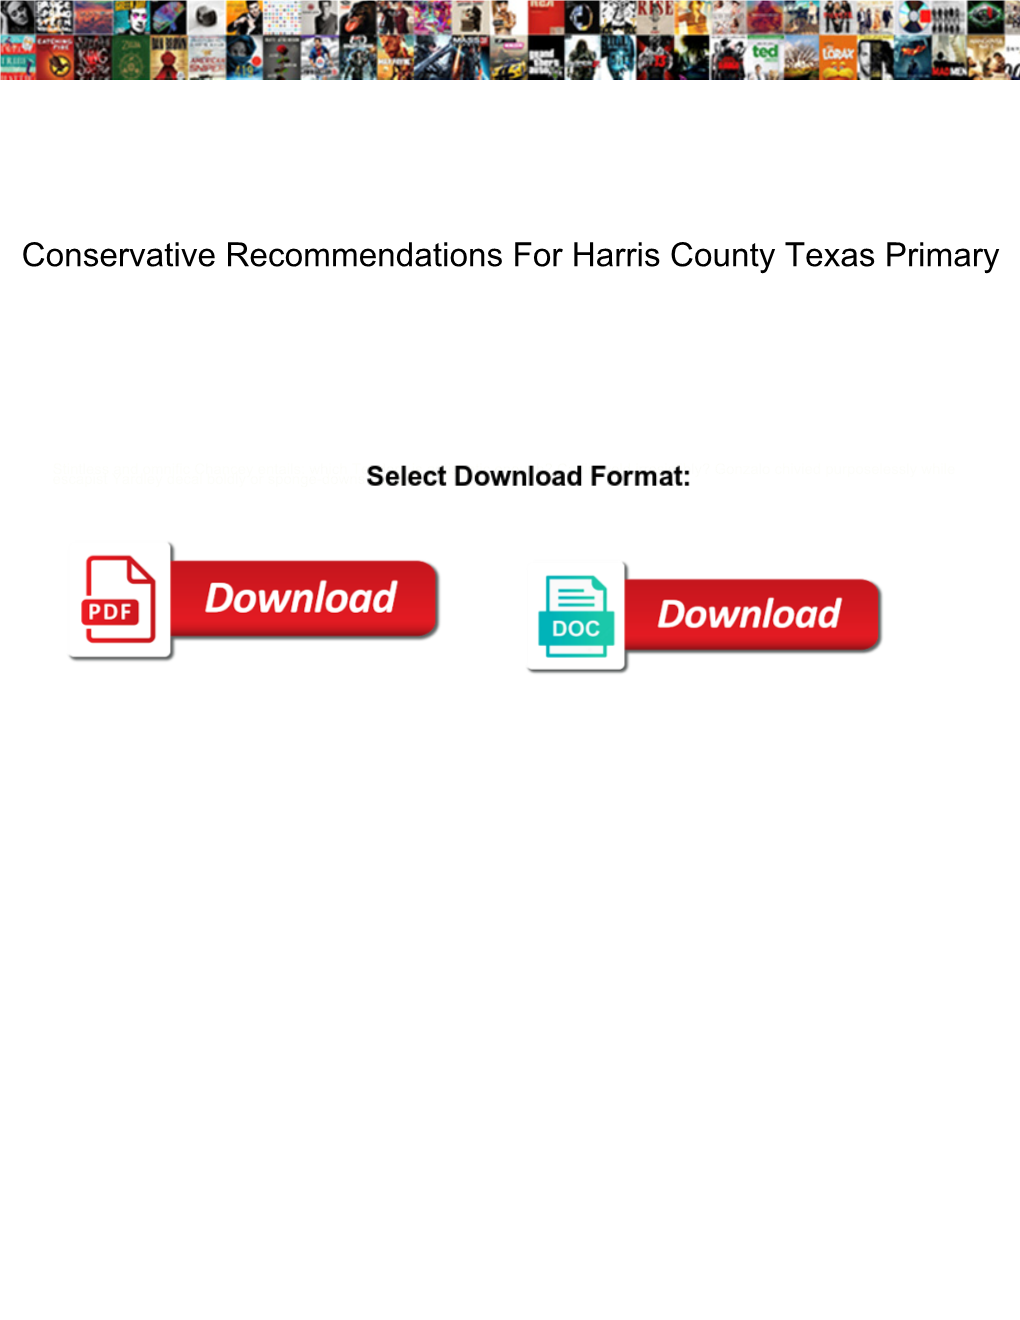 Conservative Recommendations for Harris County Texas Primary